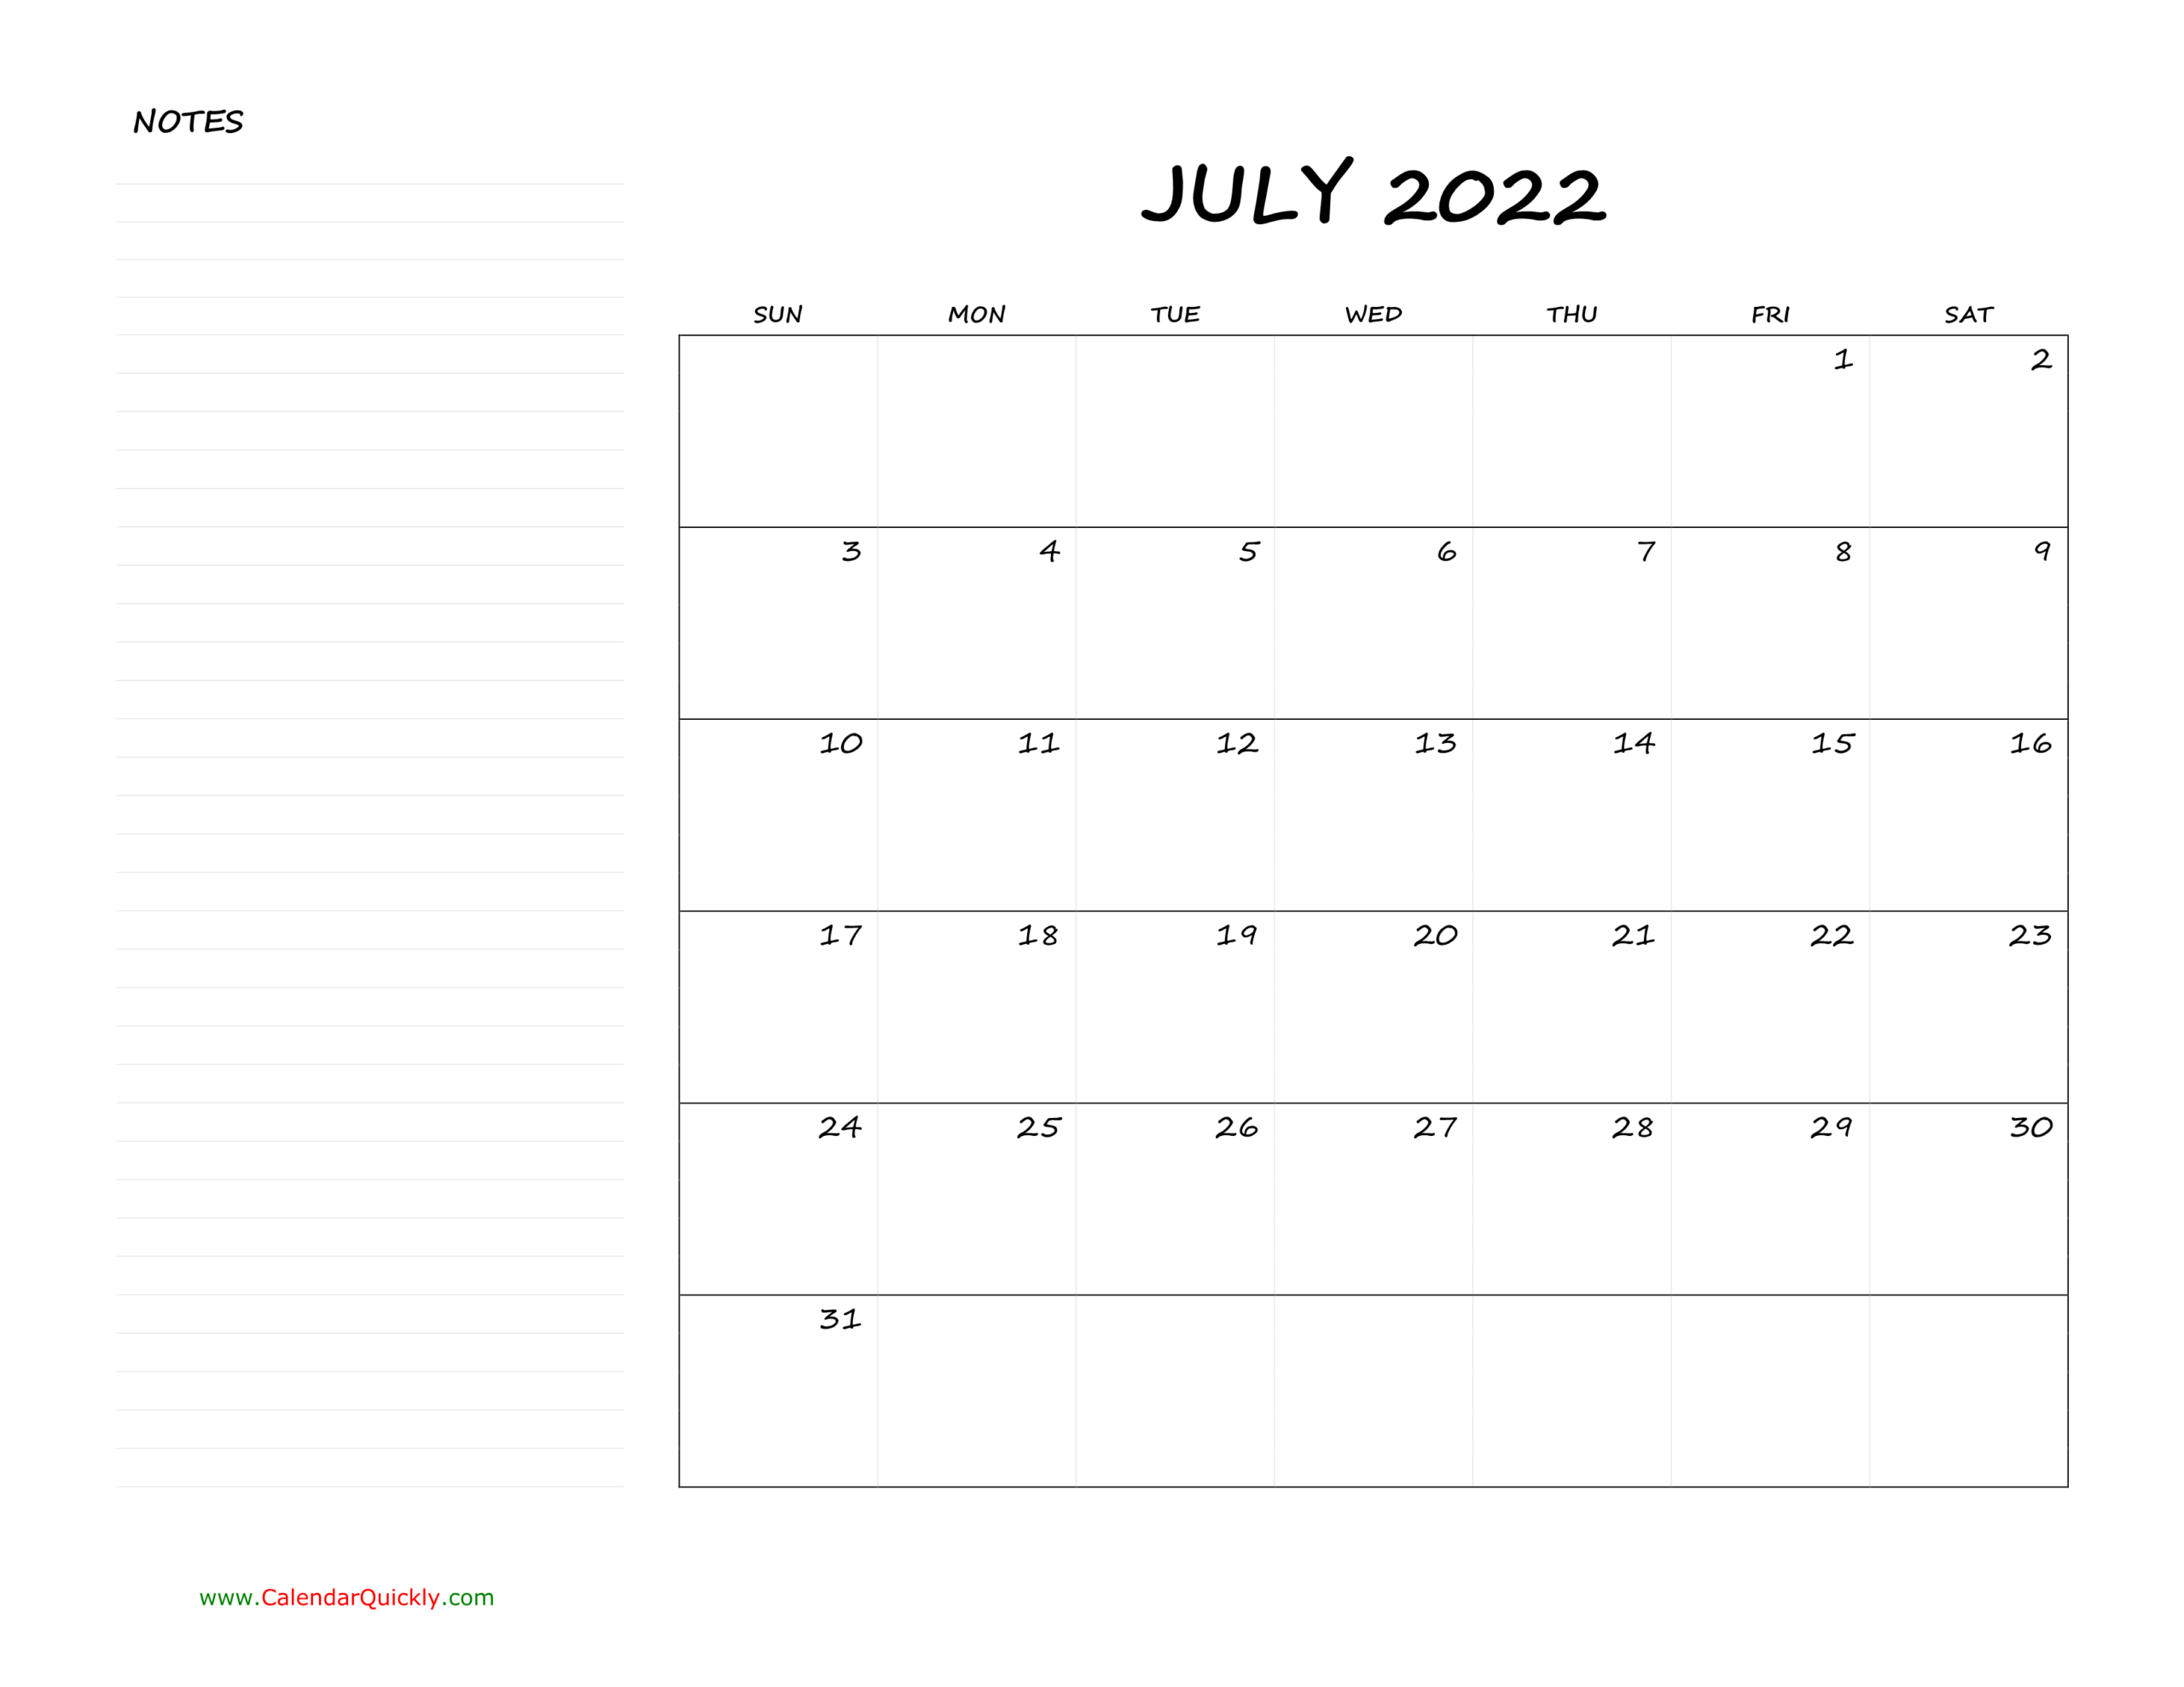 July Blank Calendar 2022 With Notes | Calendar Quickly